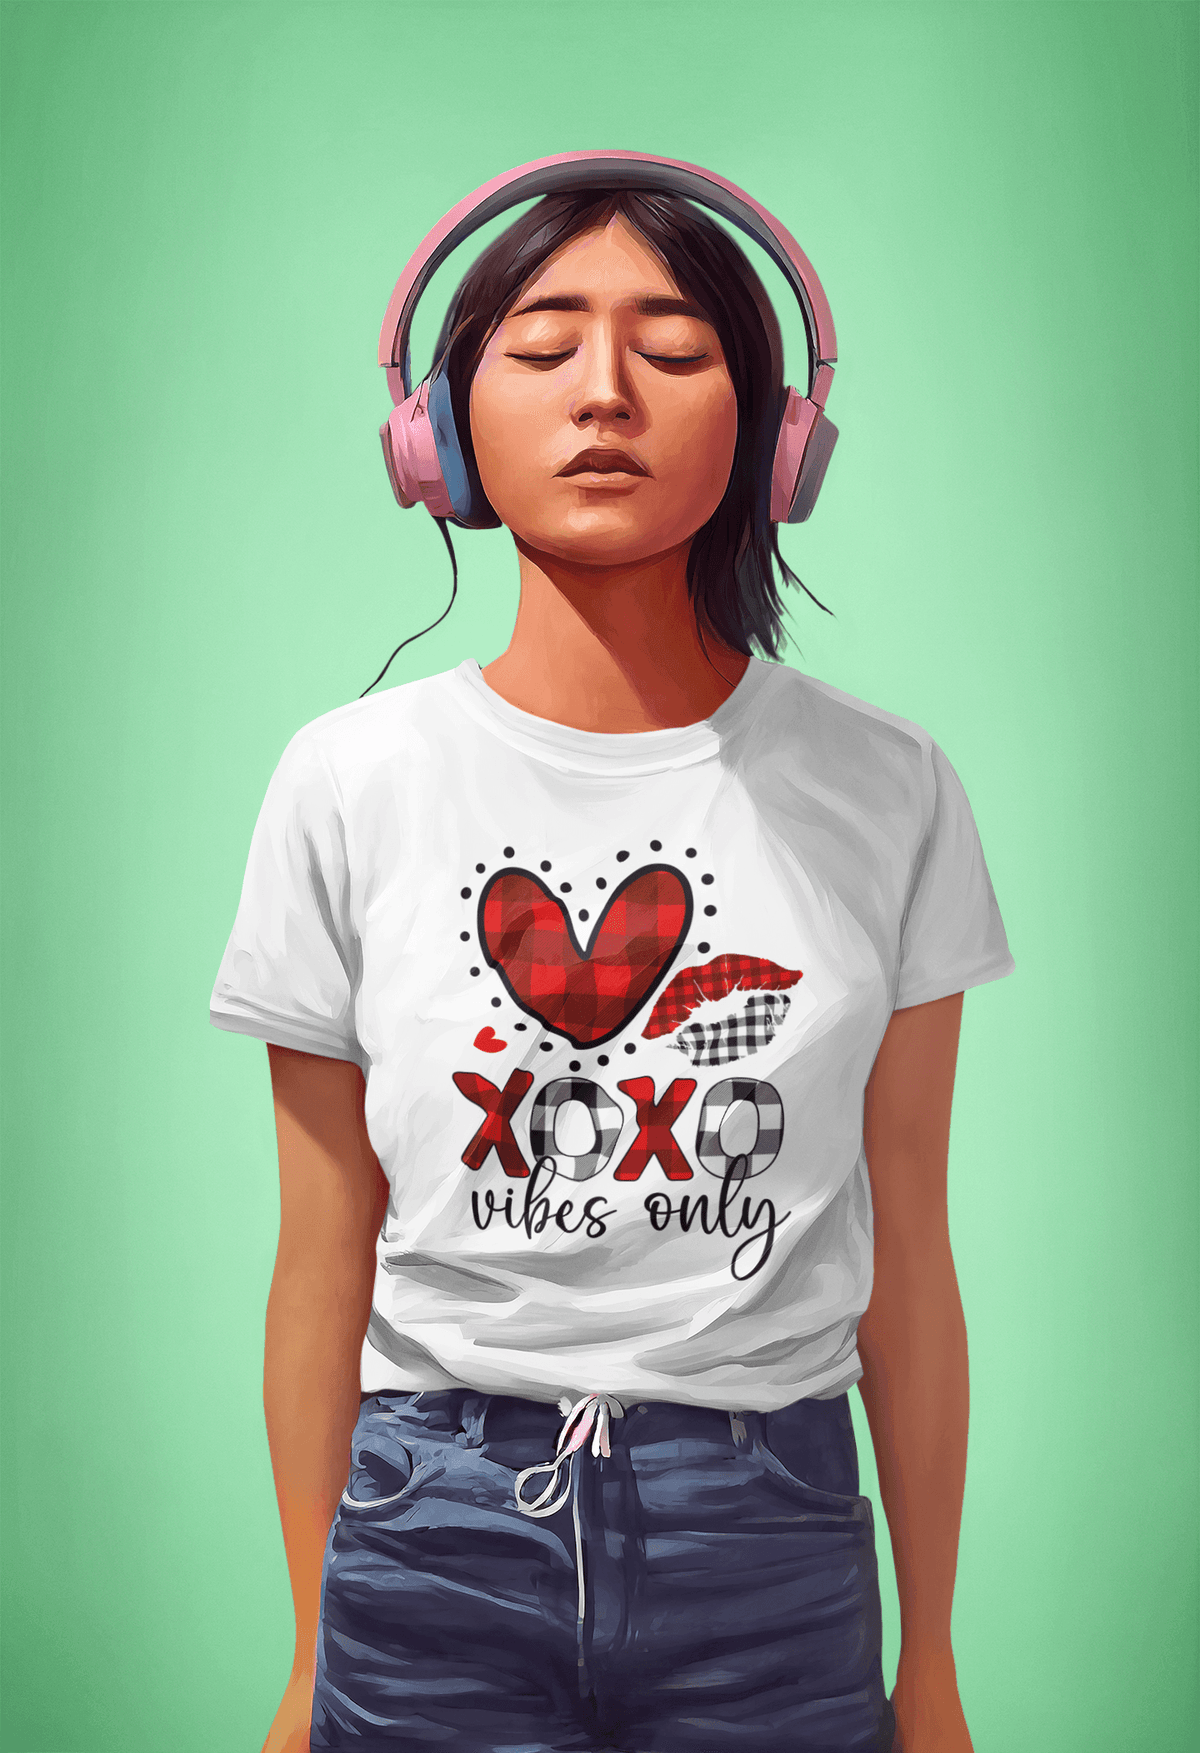 XOXO VIBES ONLY T-shirt-Regular Fit Tee-StylinArts